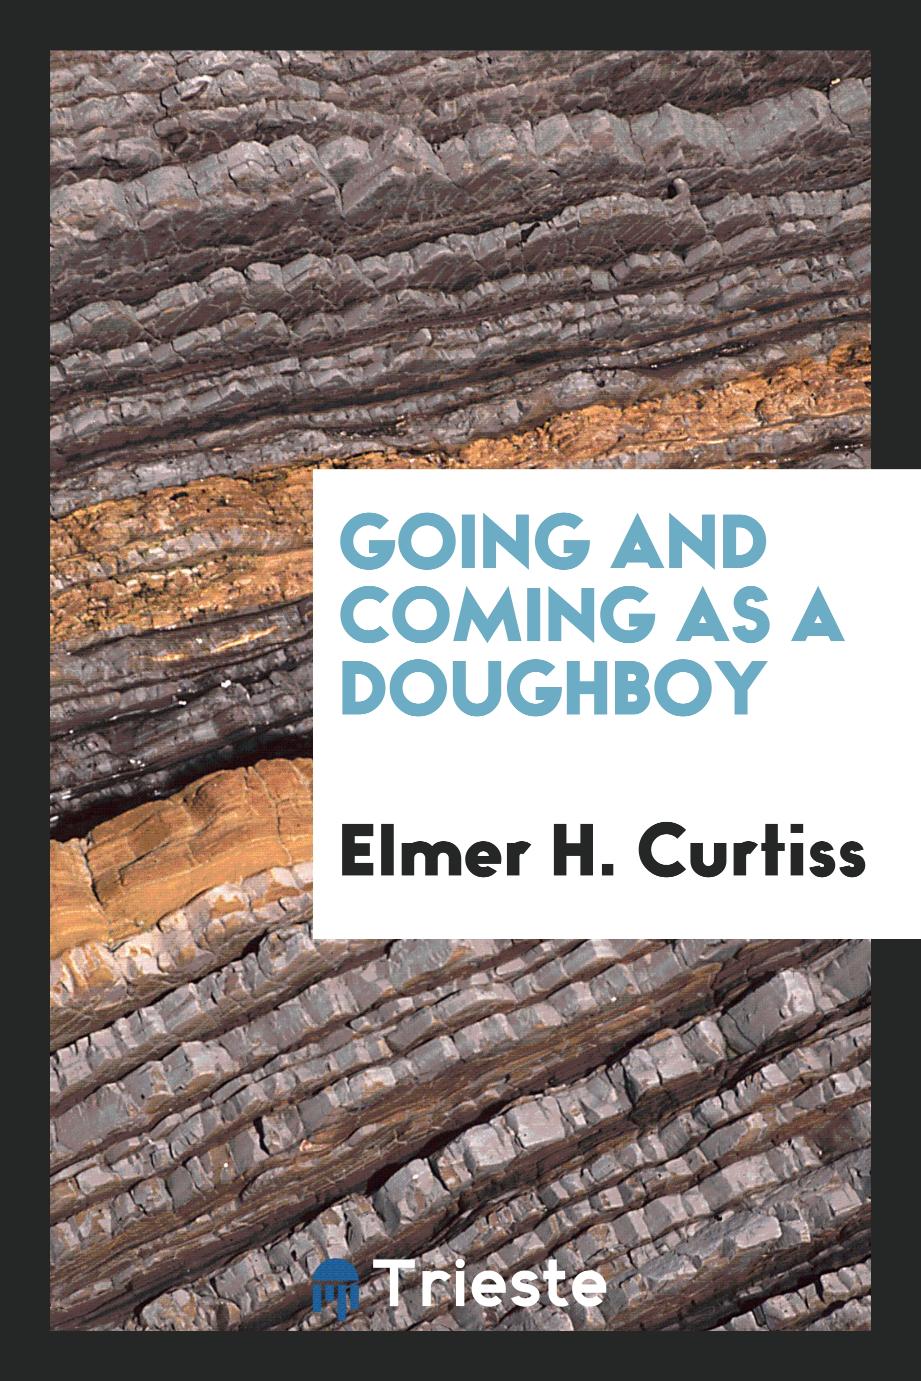 Going and coming as a doughboy